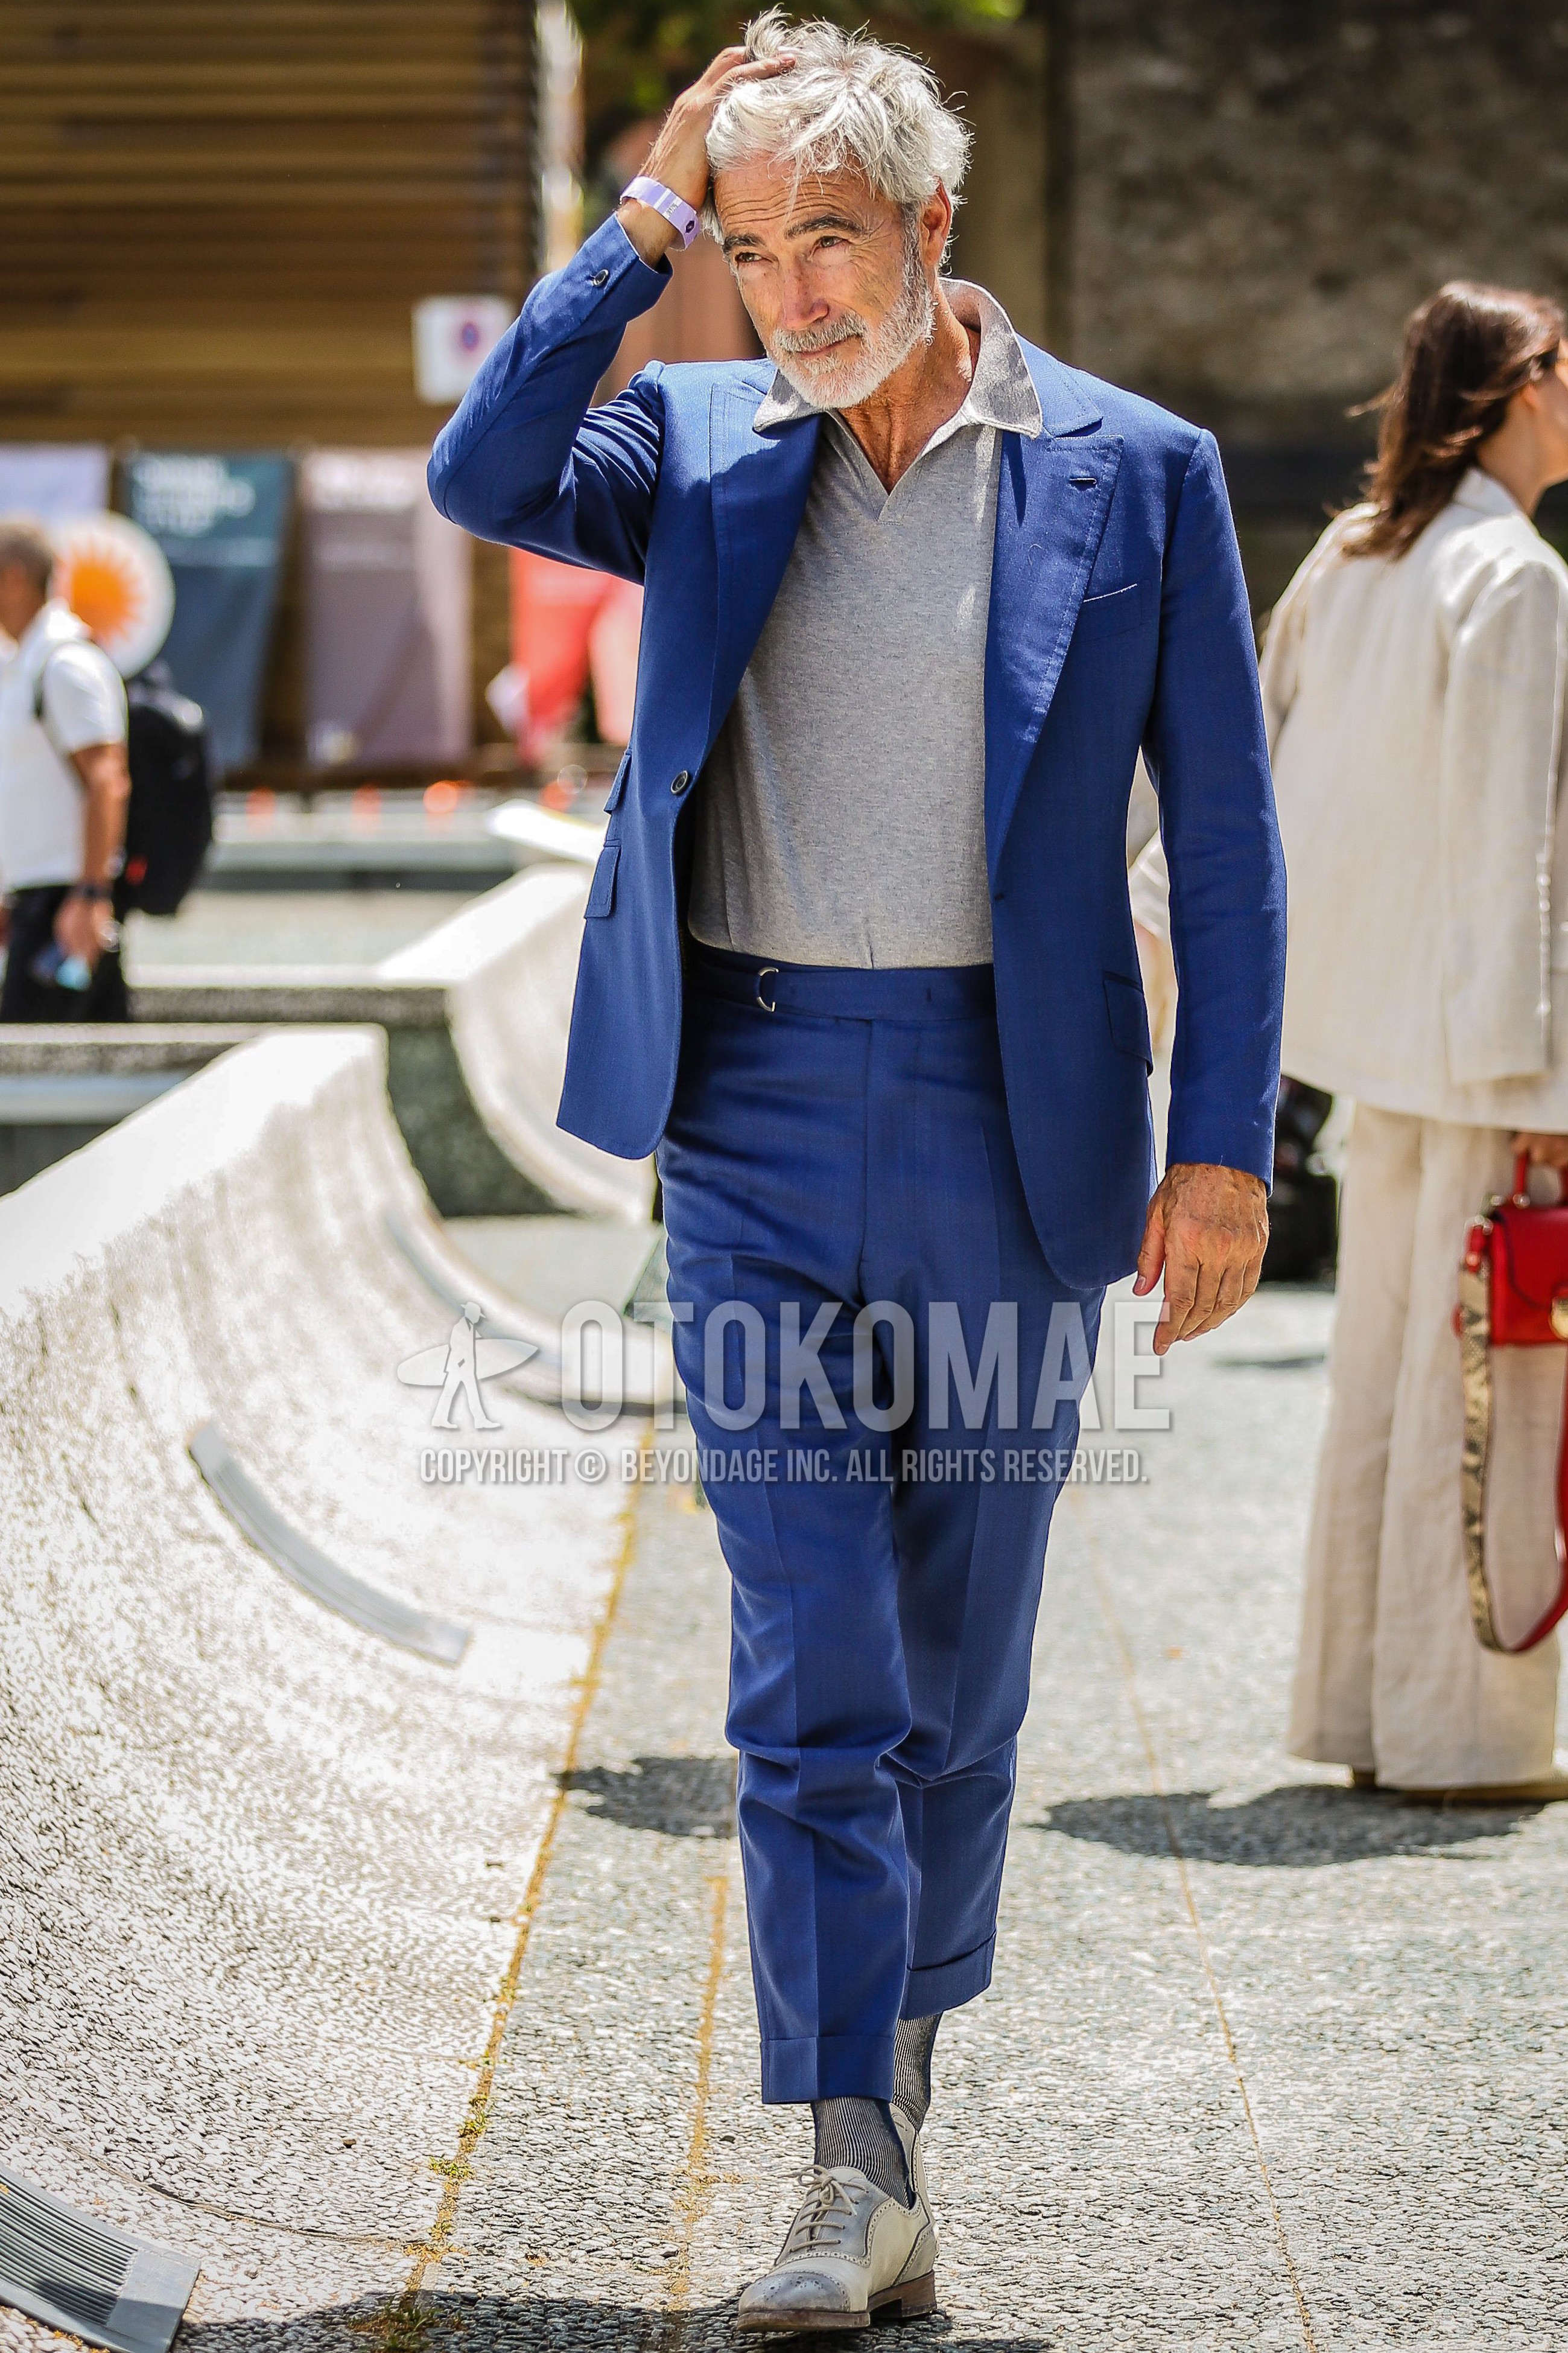 Men's spring summer outfit with gray plain polo shirt, white brogue shoes leather shoes, blue stripes suit.